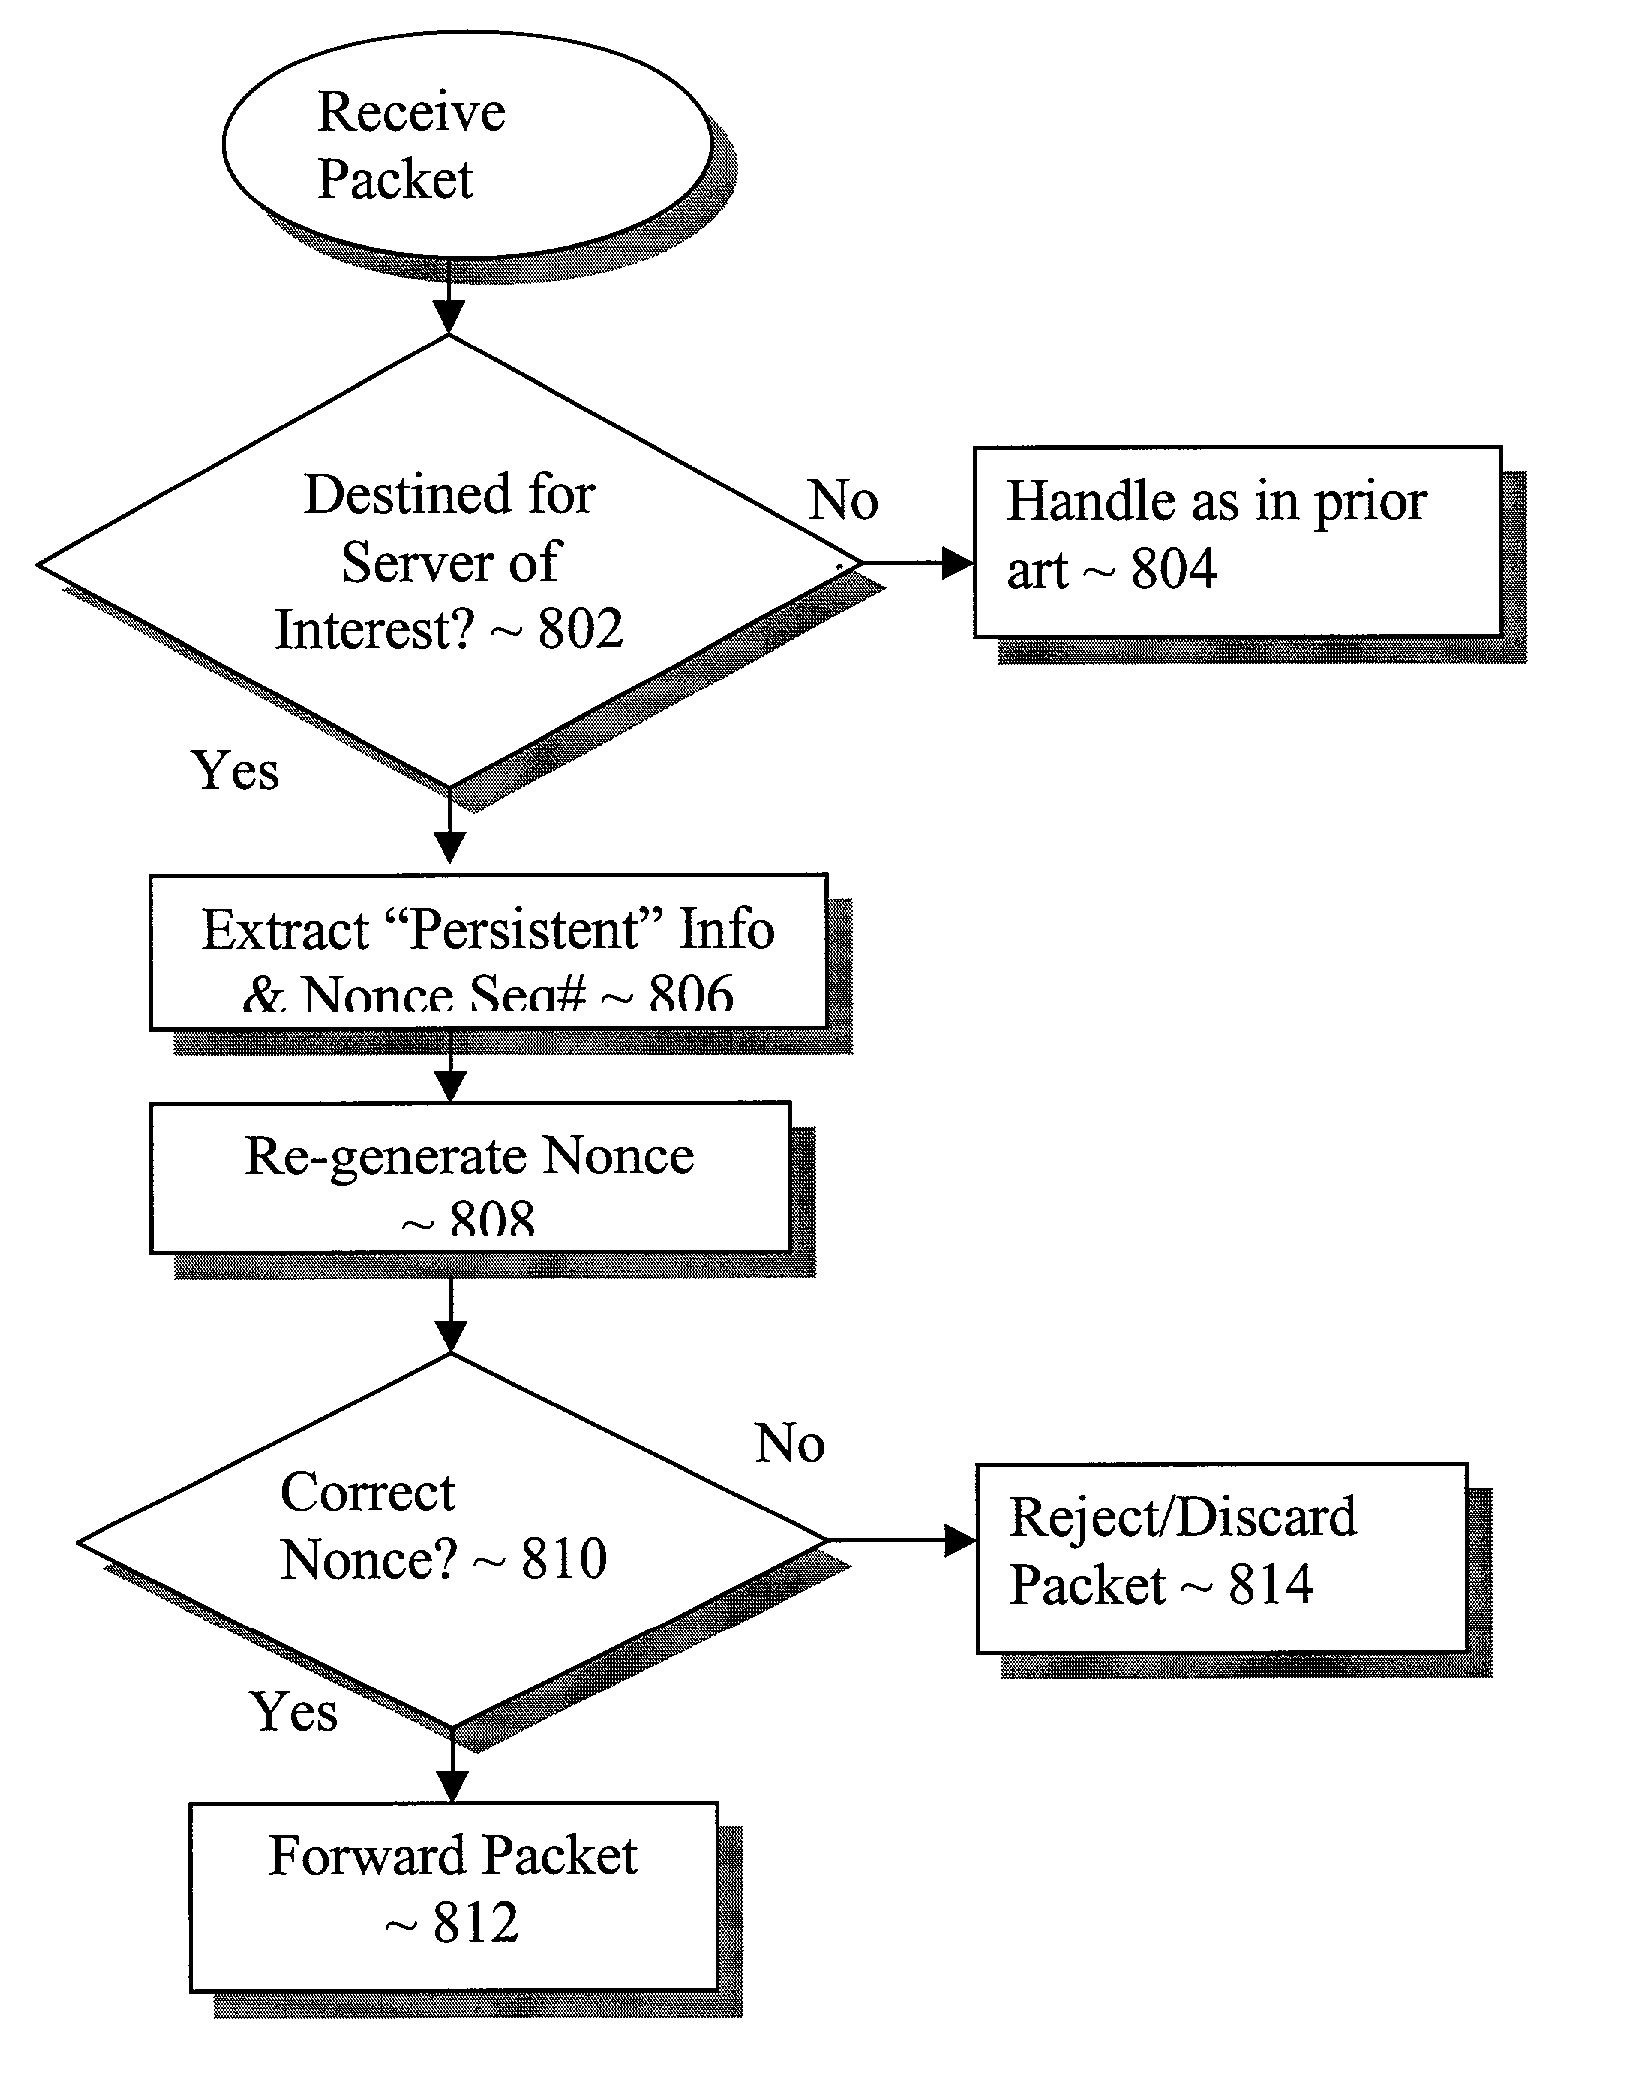 Independent detection and filtering of undesirable packets